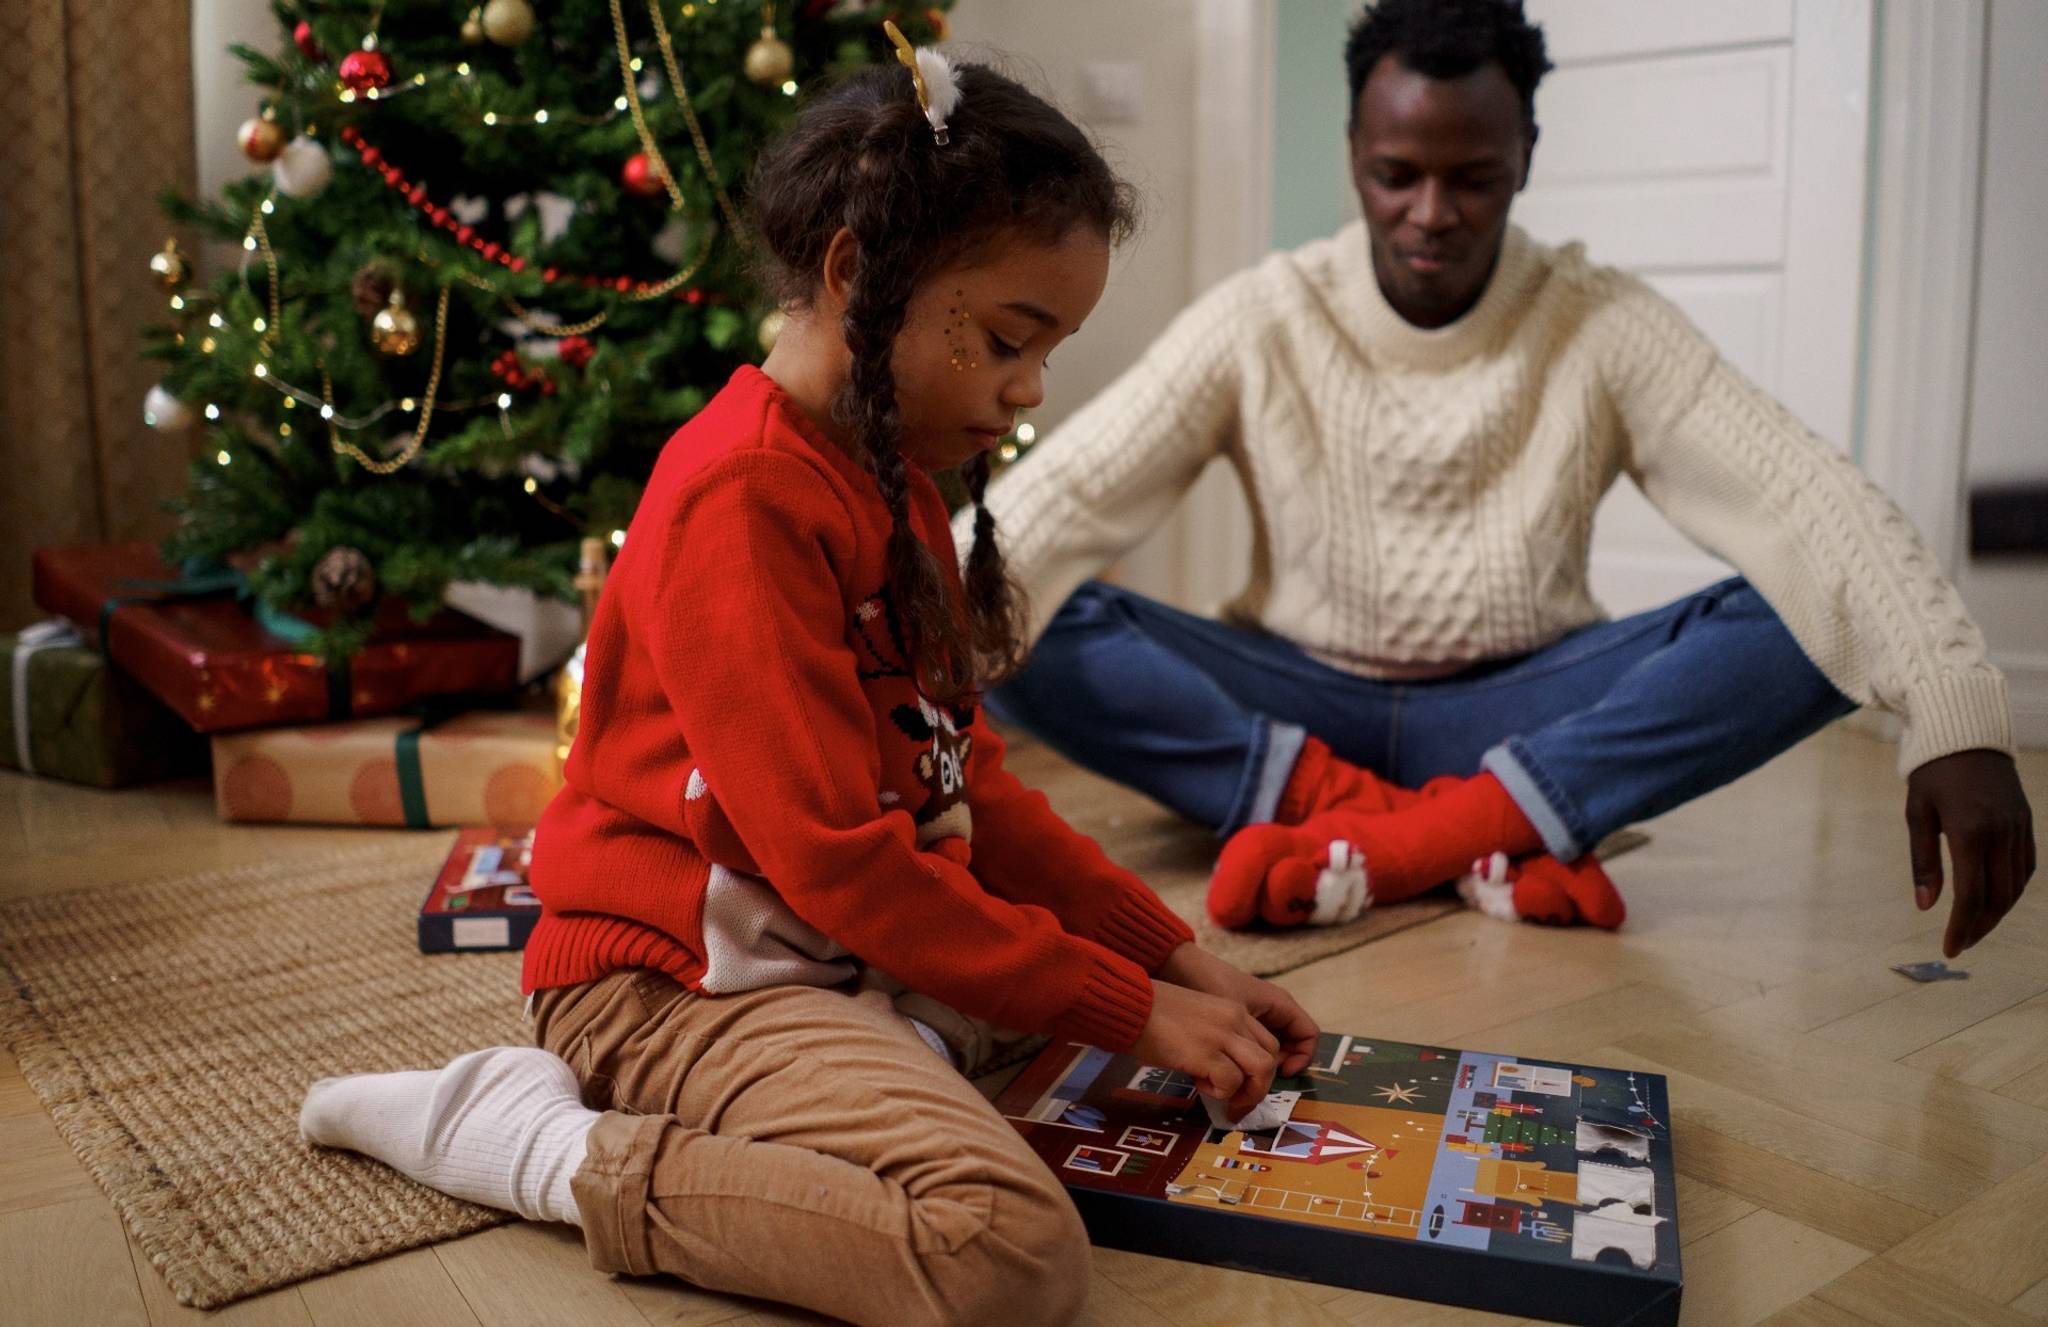 Values-driven shoppers reinvent holiday traditions